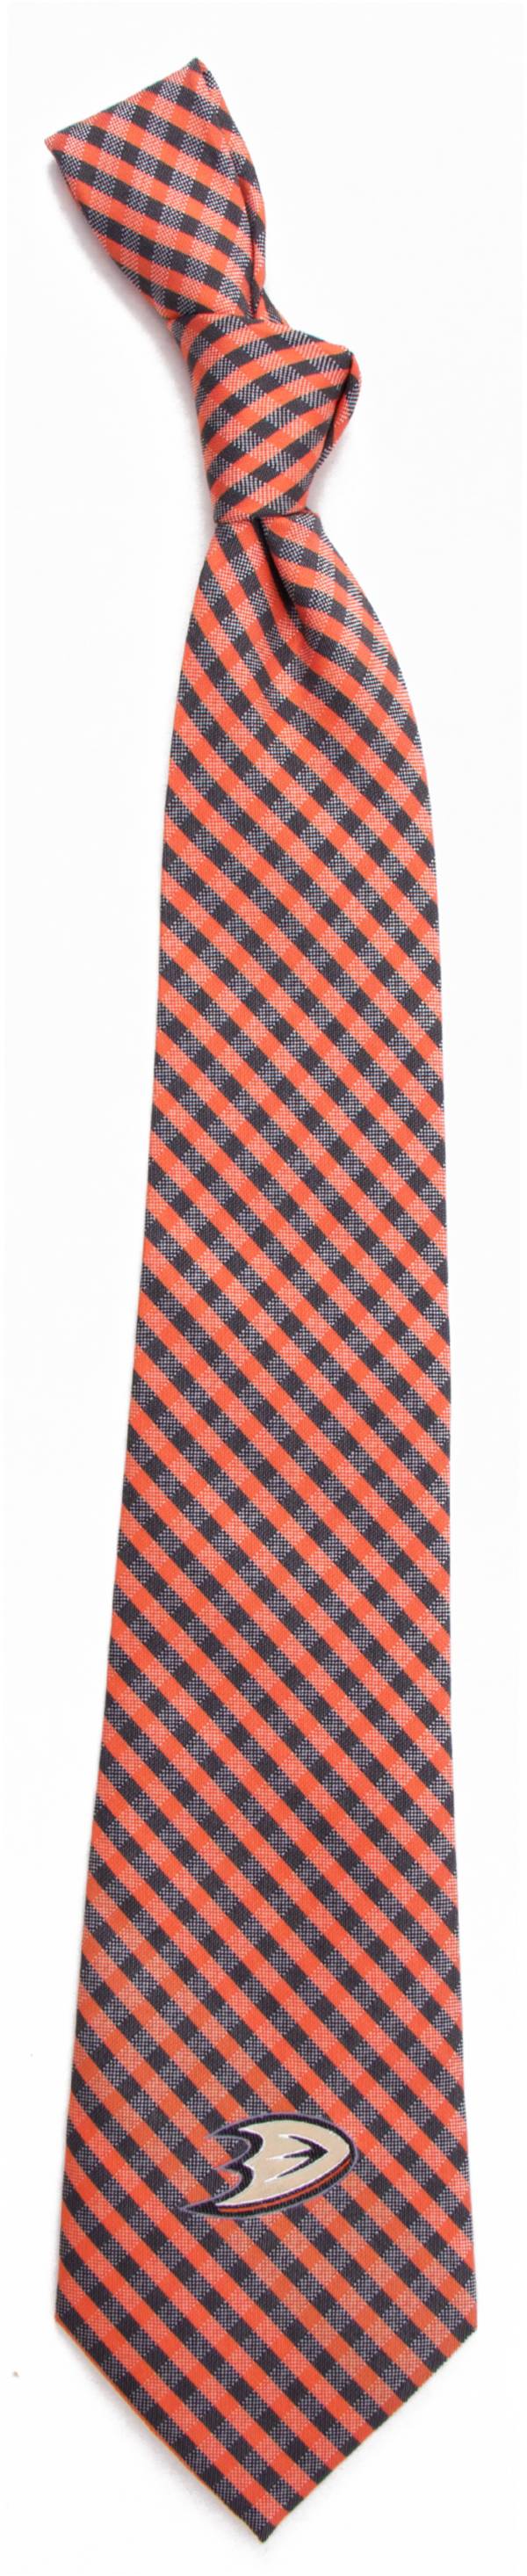 Eagles Wings Anaheim Ducks Gingham Necktie product image